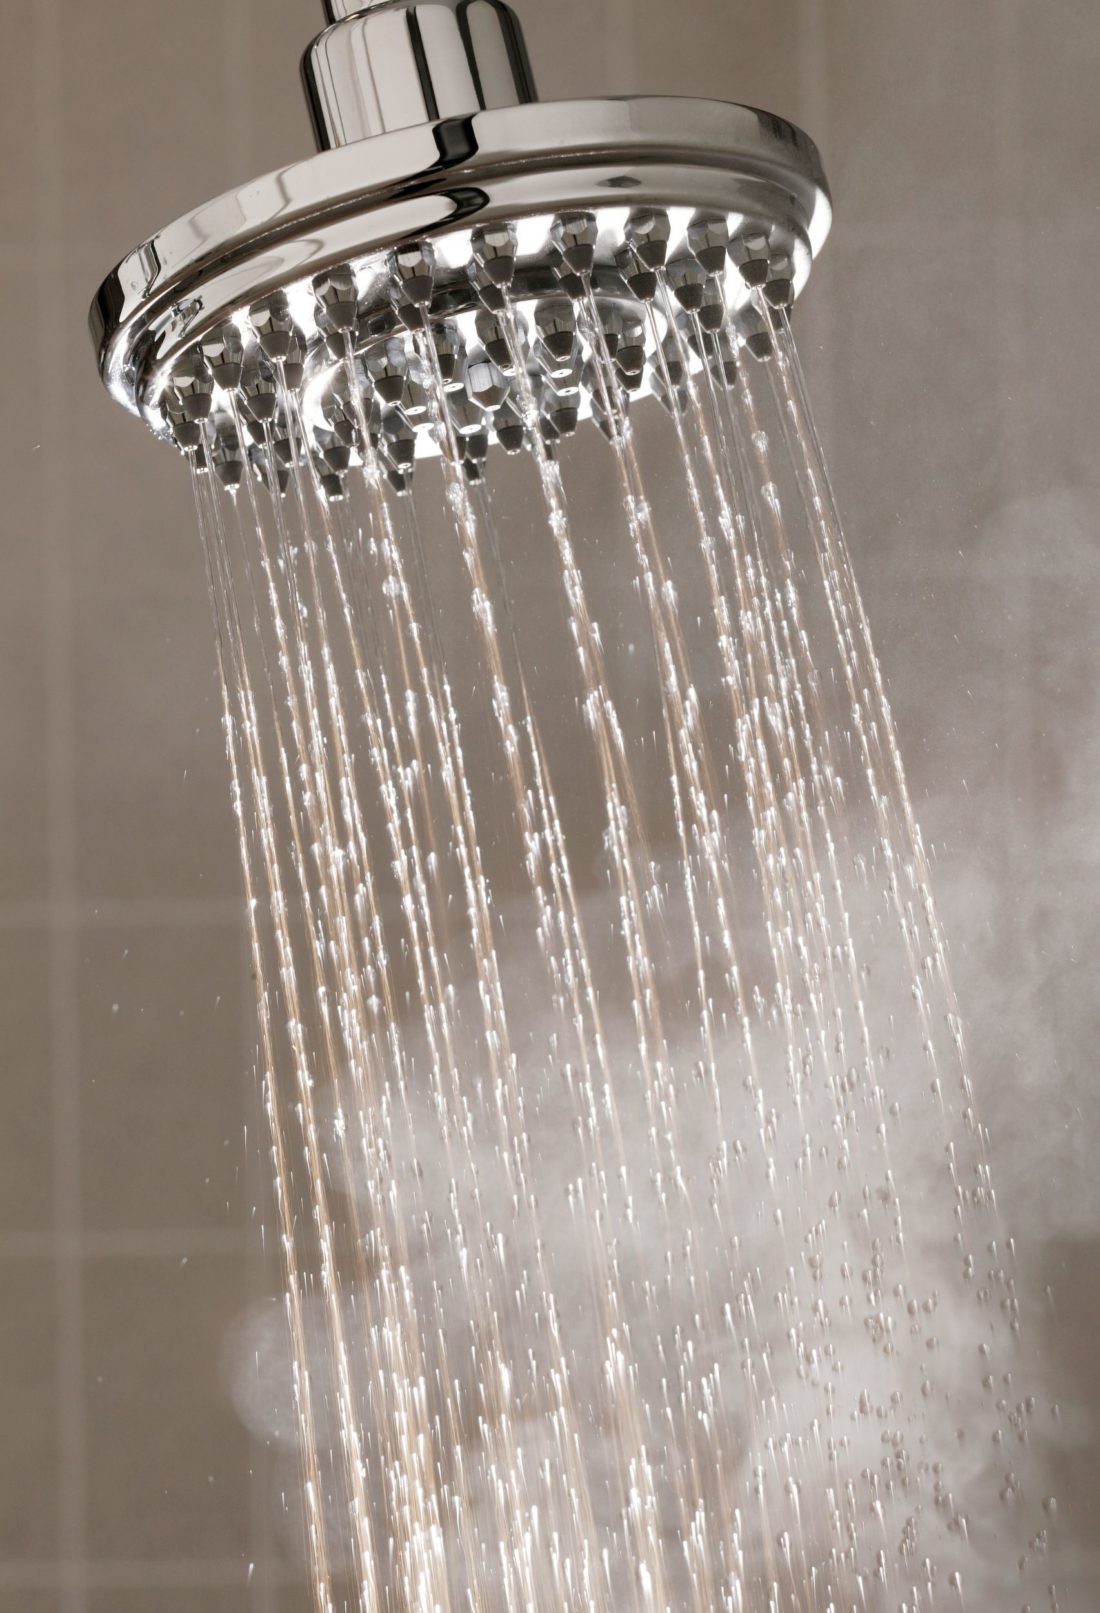 How Will You Able to Know When You Need Melbourne Hot Water Repairs - Rita Reviews